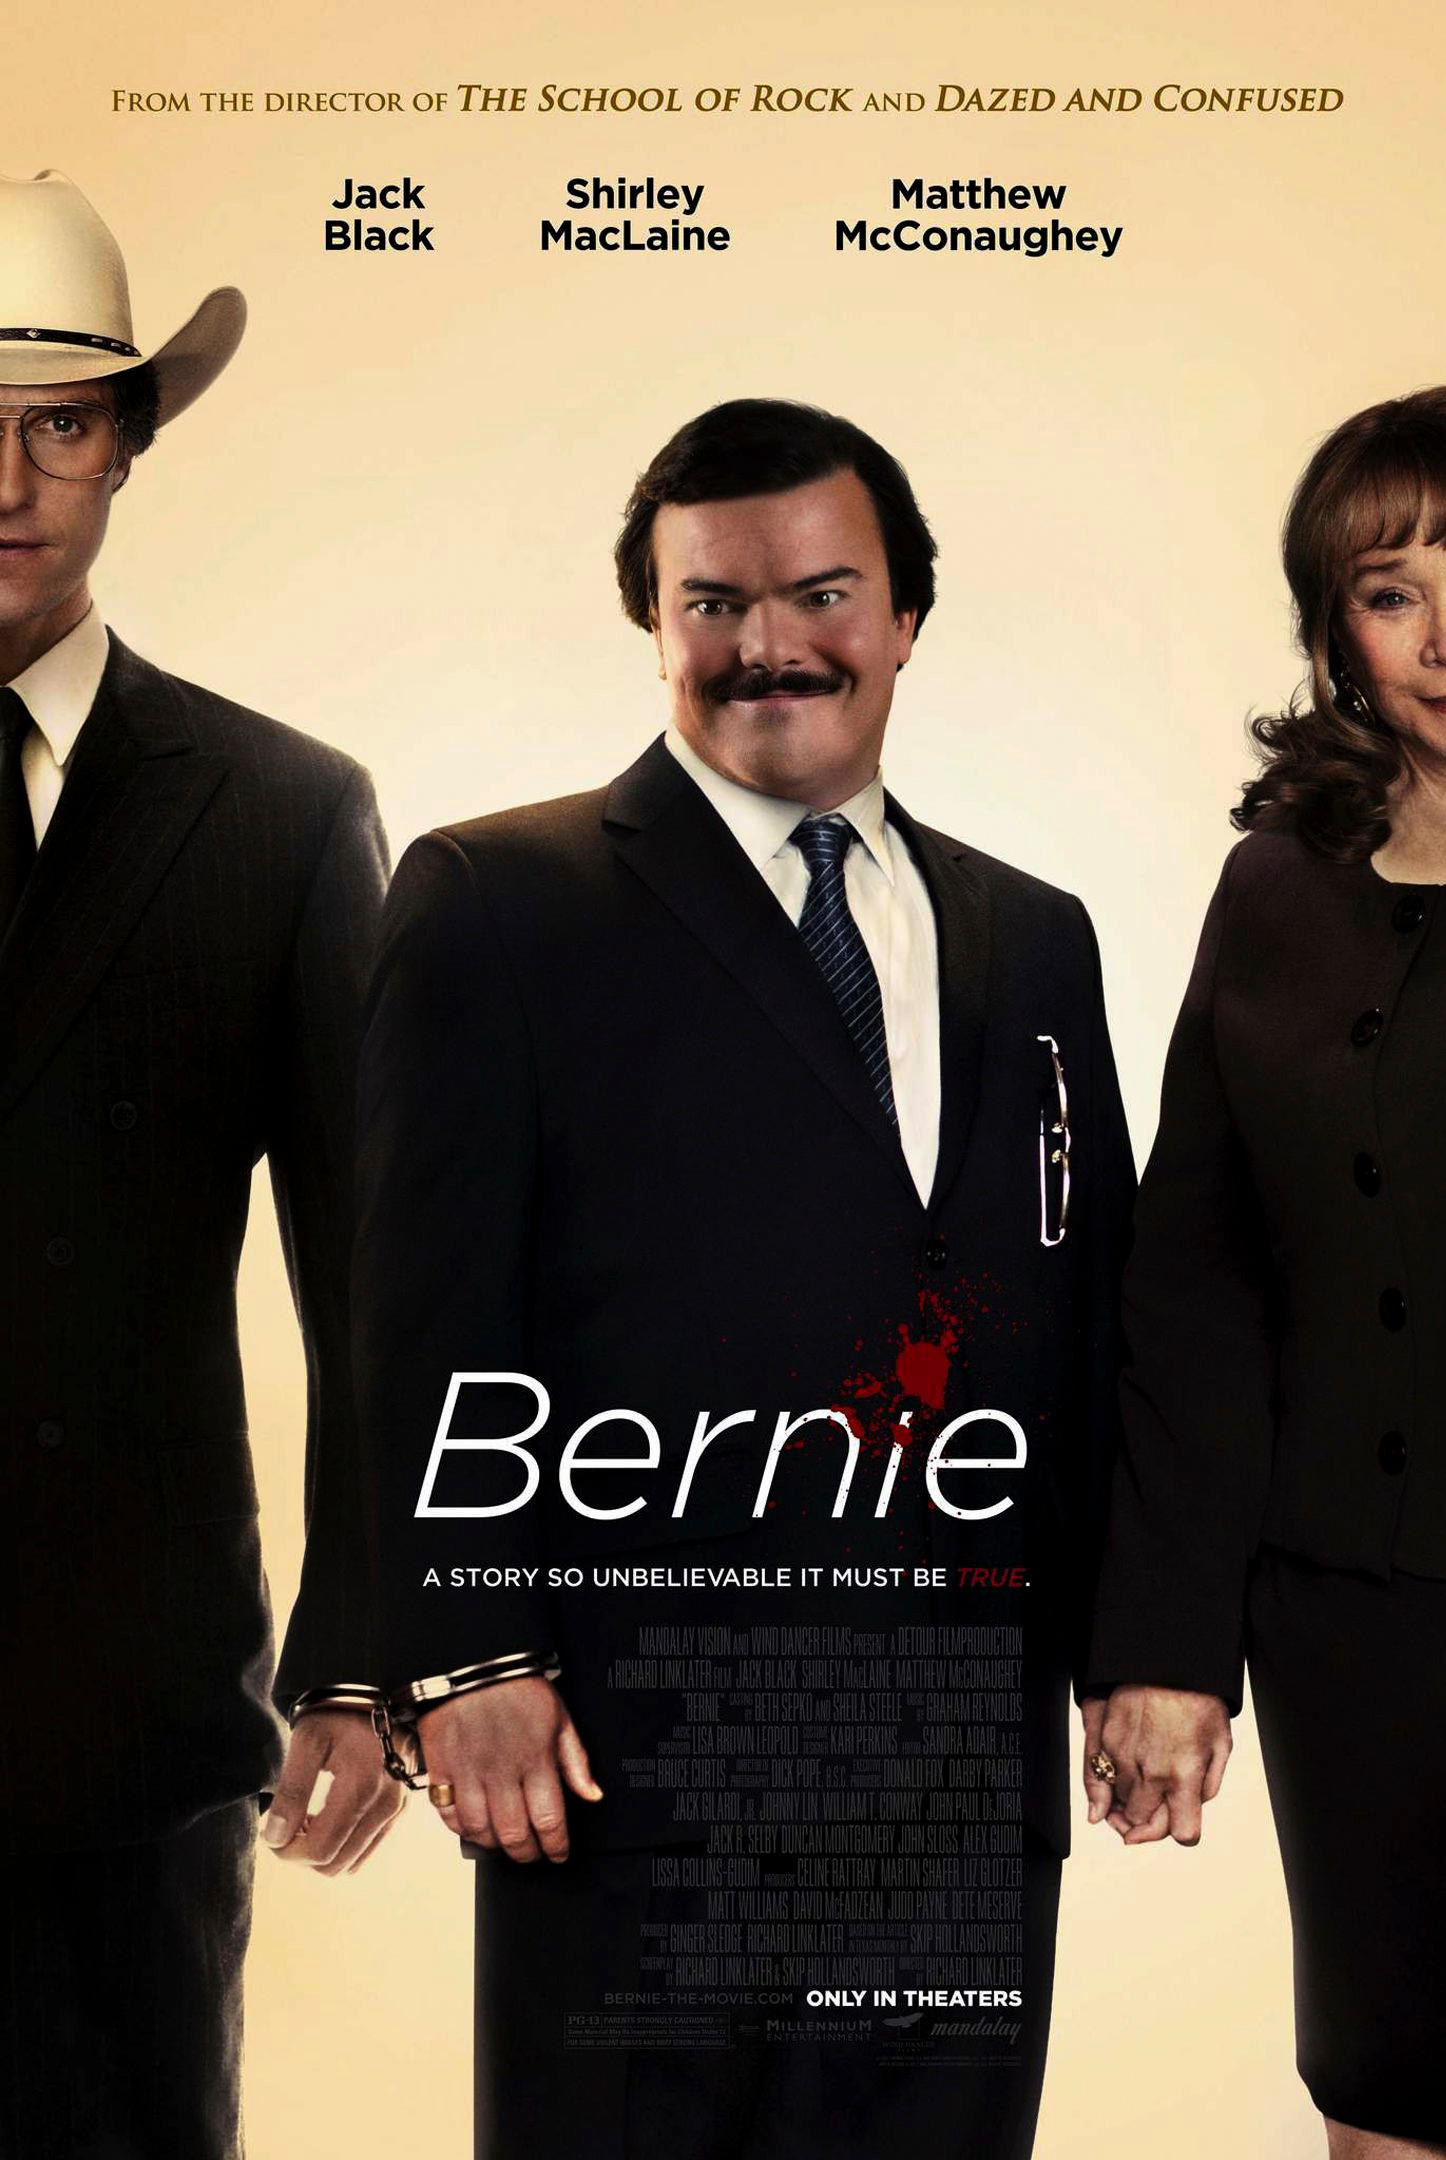 Poster image for the film &quot;Bernie&quot; with Bernie, depicted by Jack Black, standing between Shirley MacLaine and Matthew McConaughey with an awkward smile